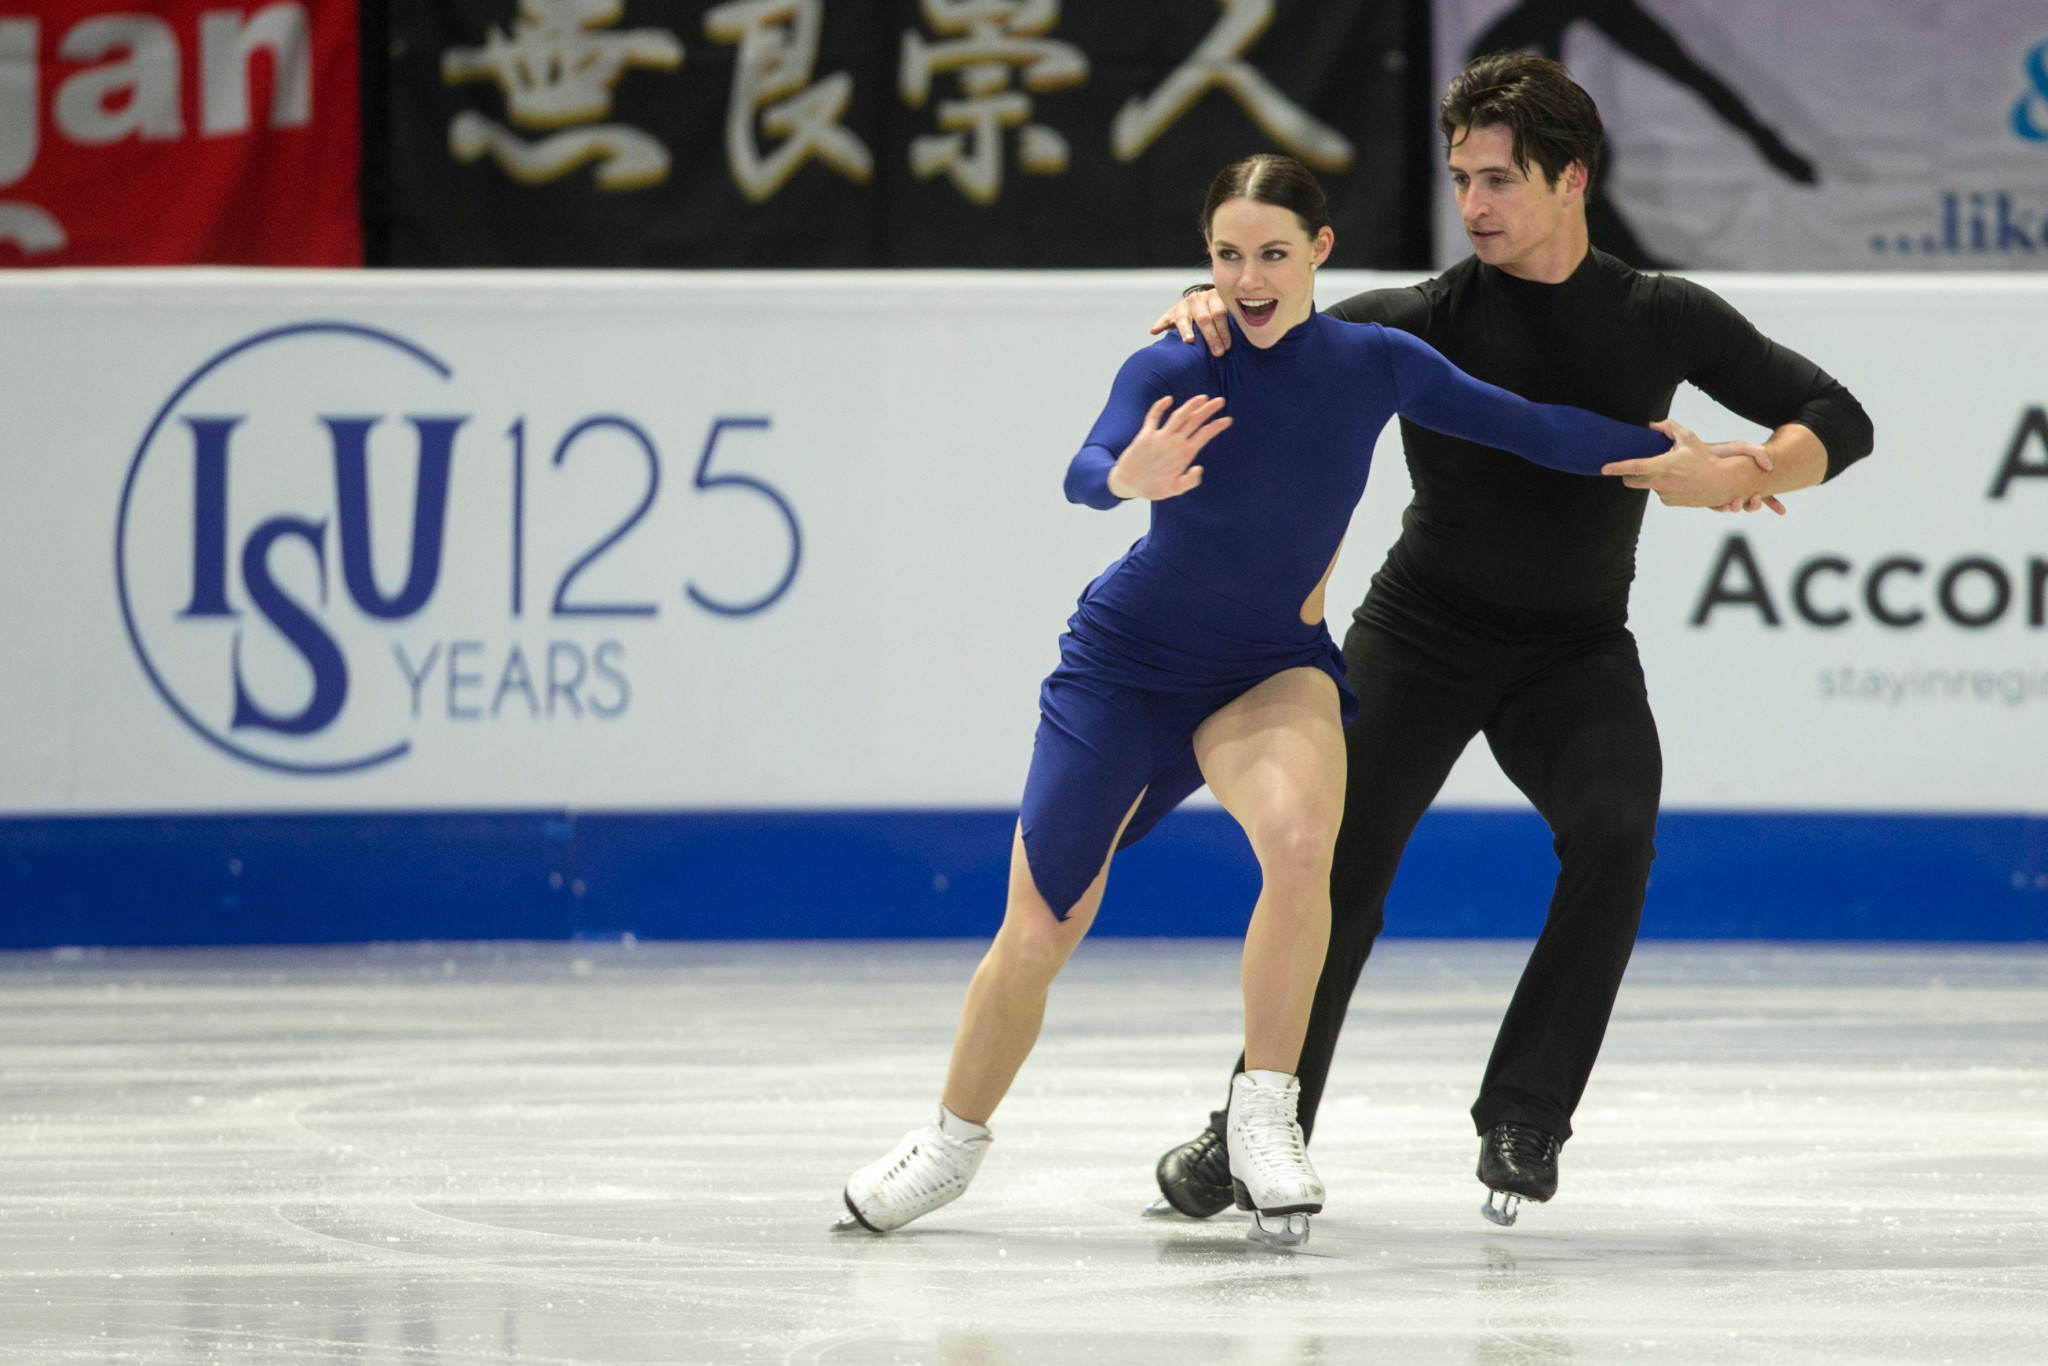 Three-time reigning world champions Tessa Virtue and Scott Moir will be aiming for their seventh Skate Canada International ice dance title ©Getty Images